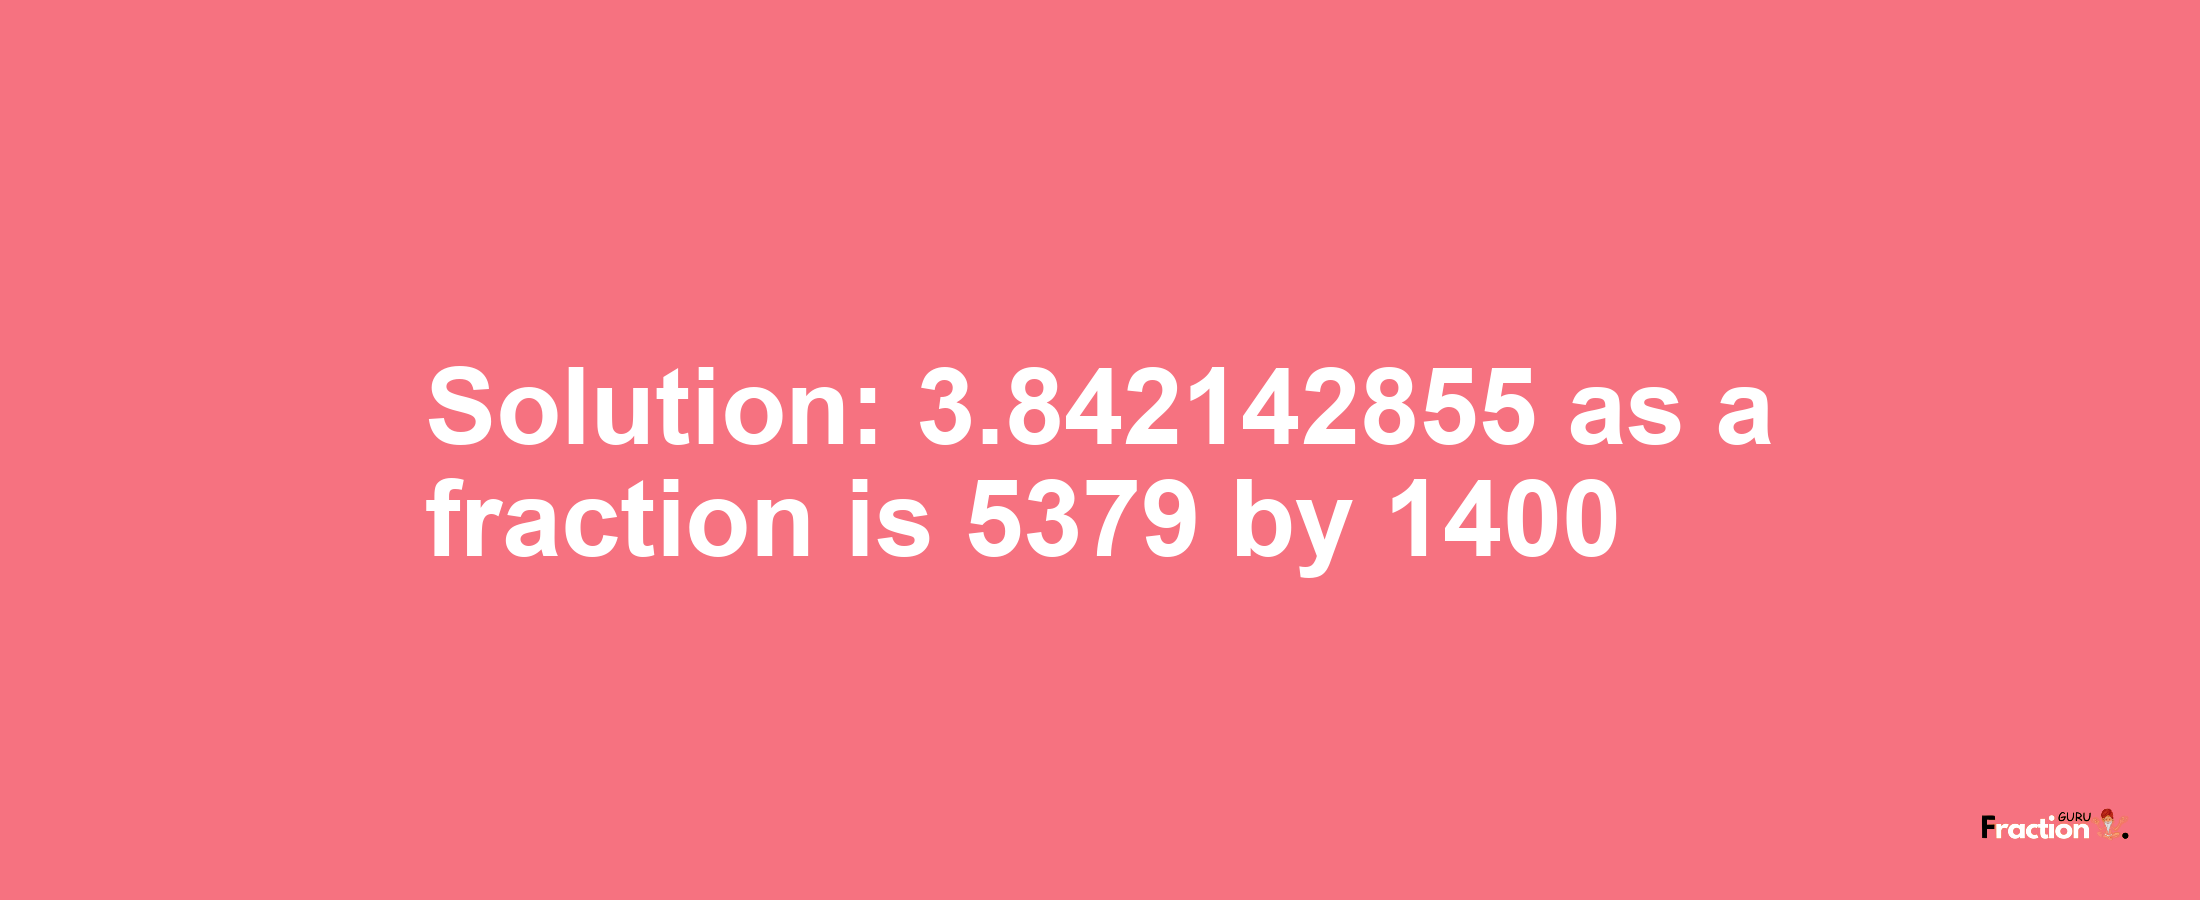 Solution:3.842142855 as a fraction is 5379/1400